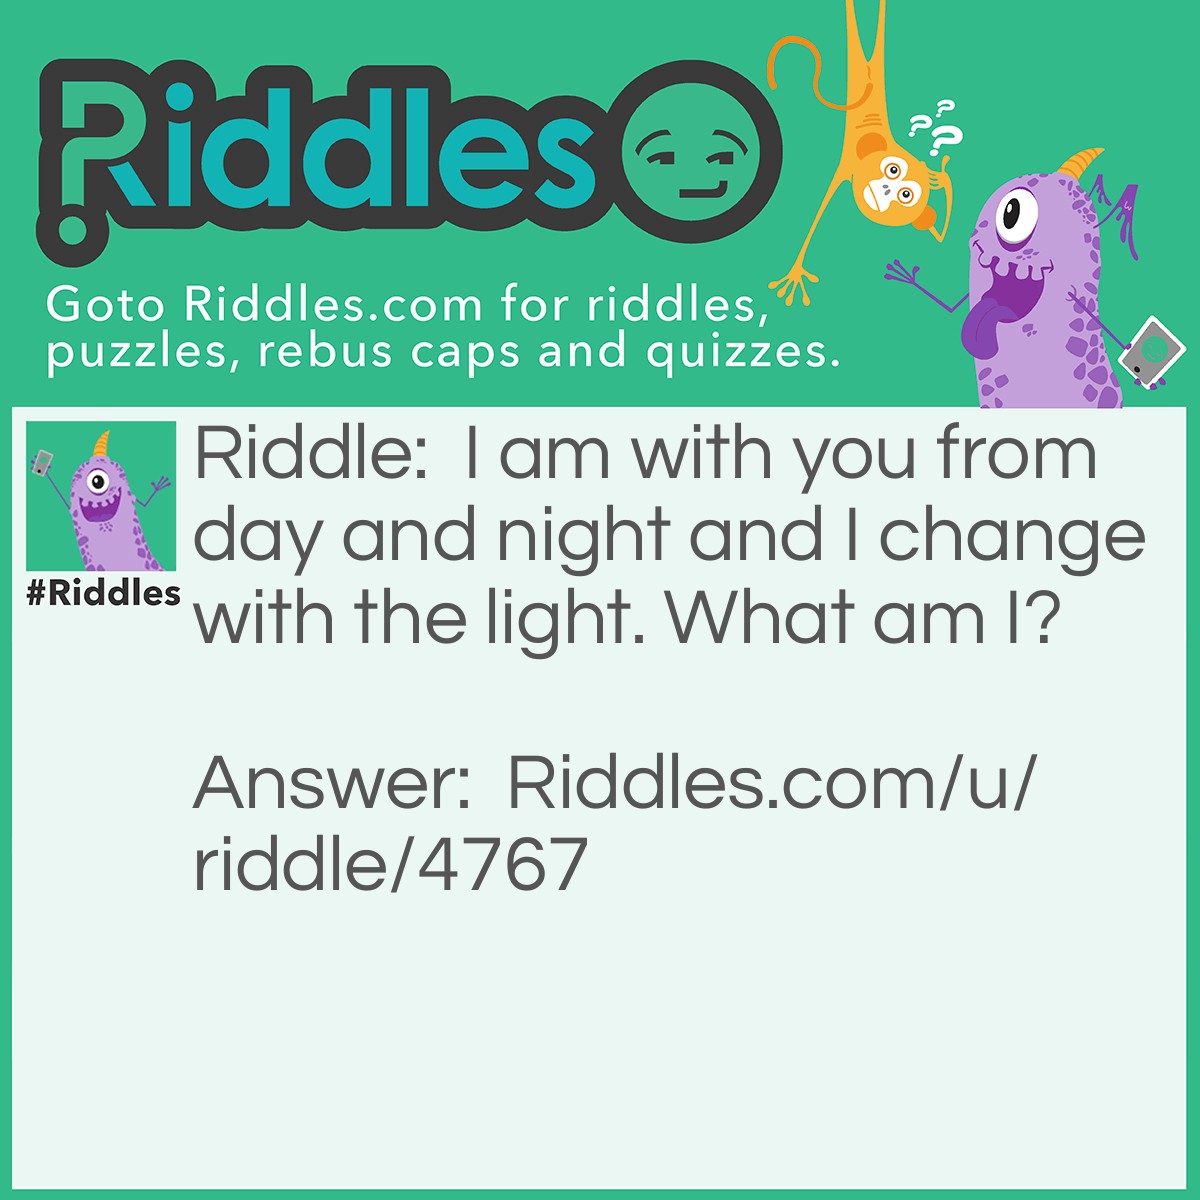 Riddle: I am with you from day and night and I change with the light. What am I? Answer: A shadow.